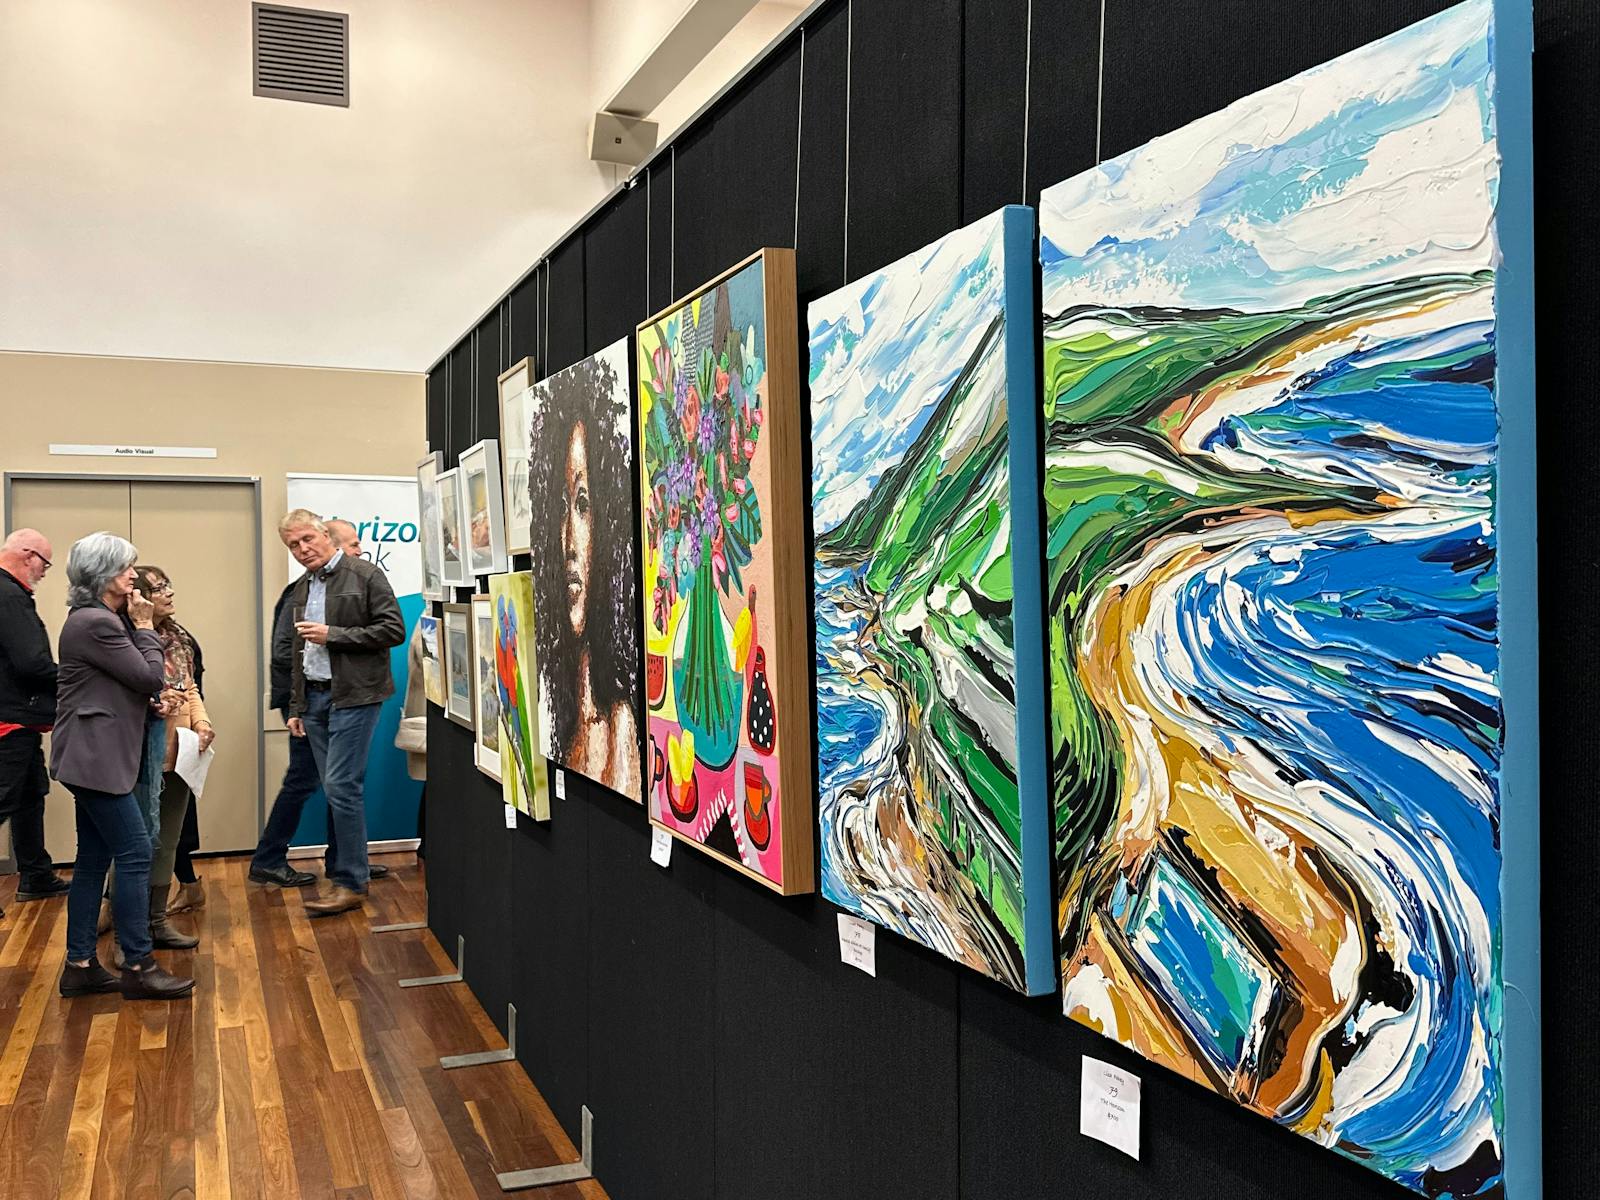 Image for Thirroul Seaside and Arts Festival